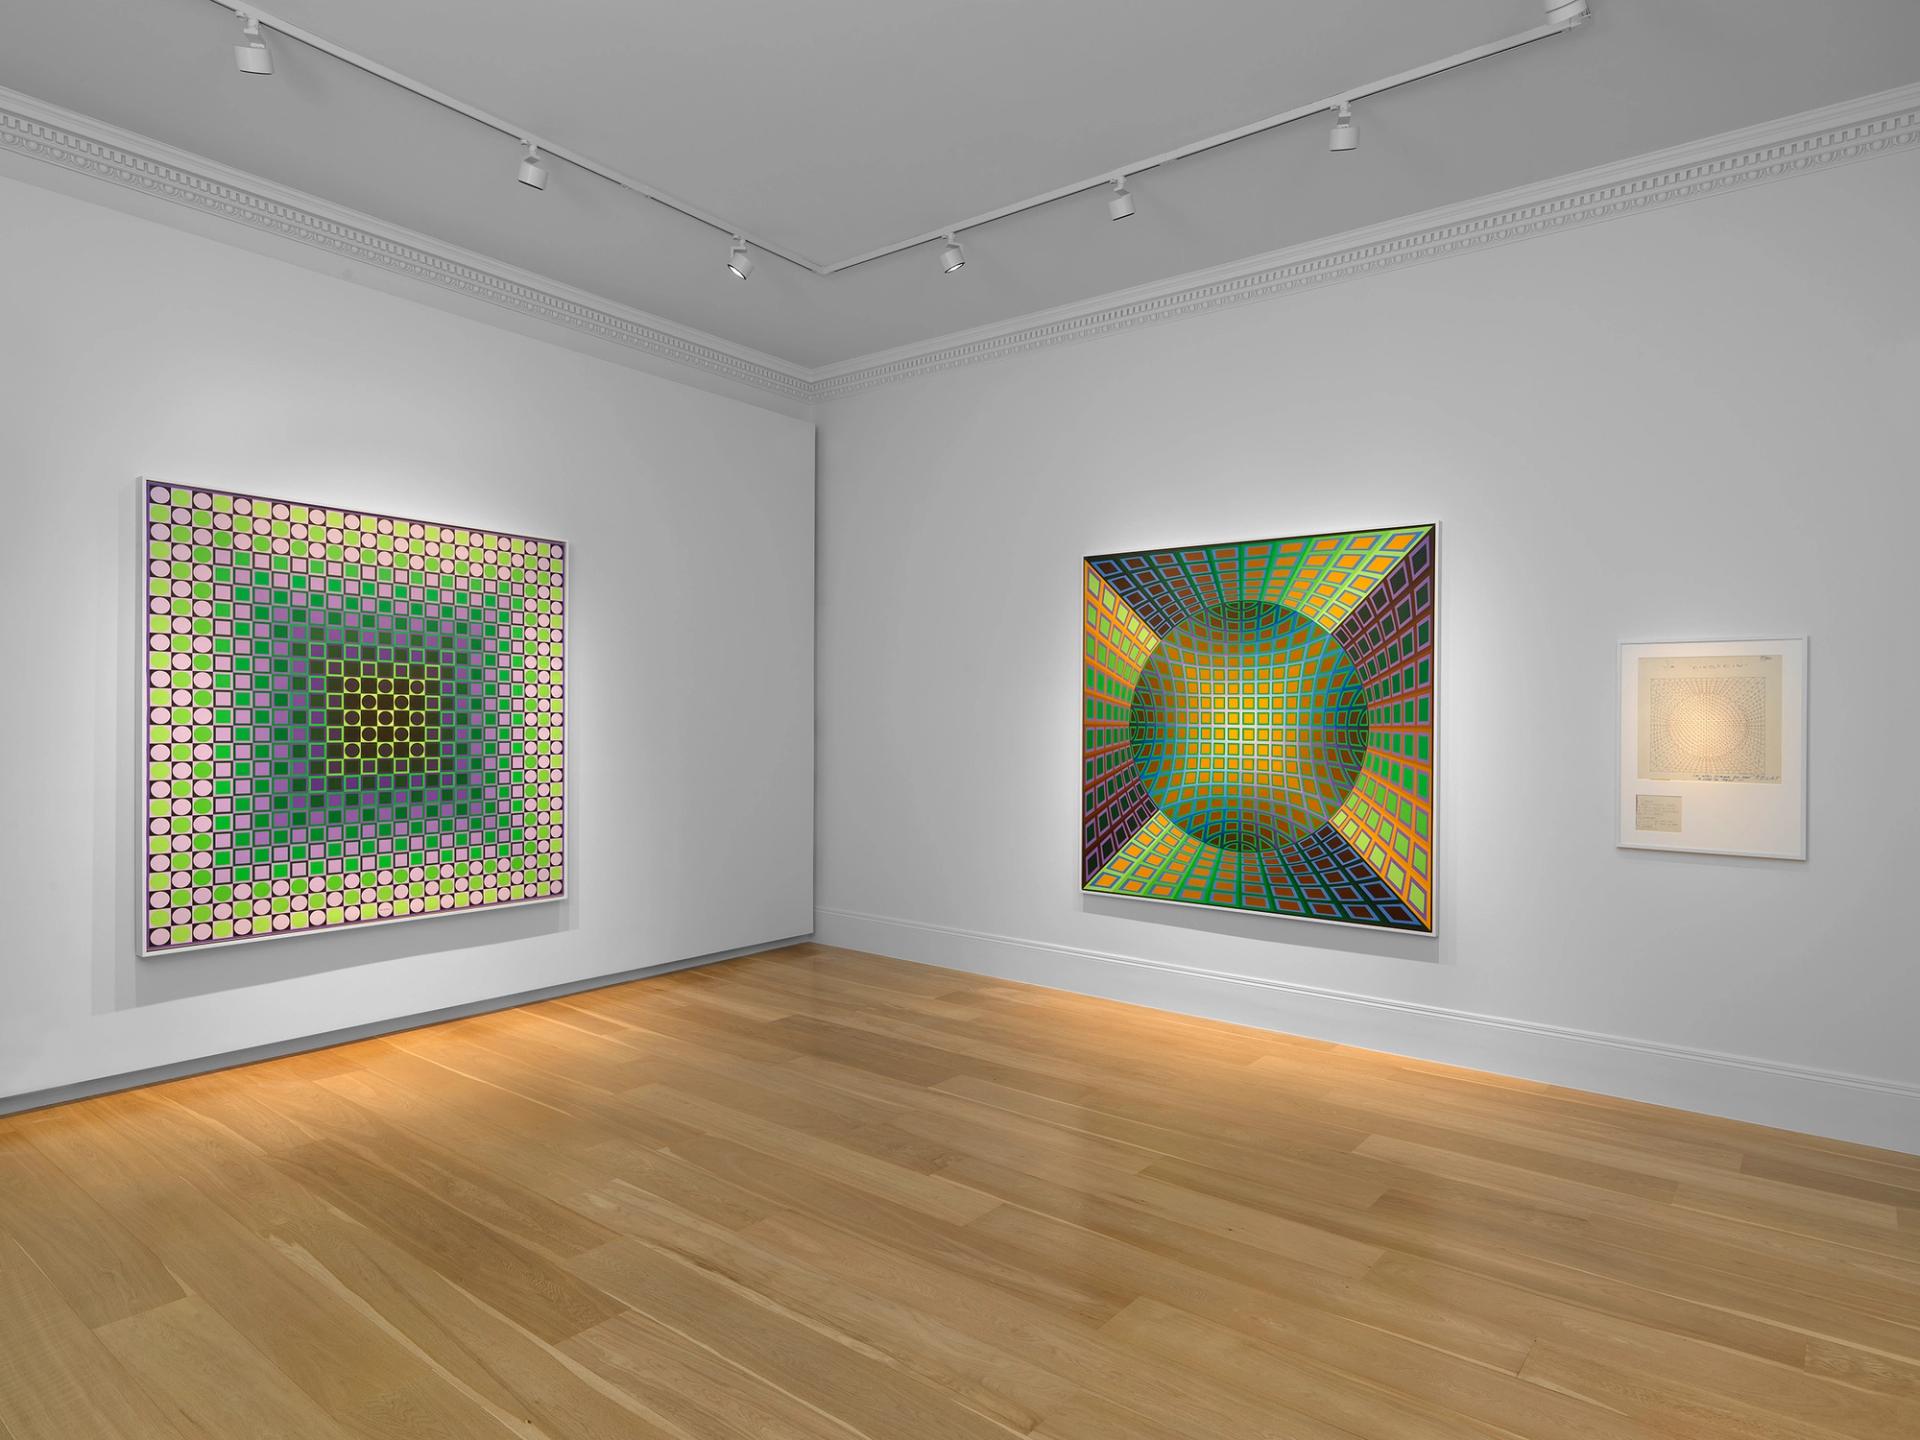 Installation view of Einstein in the Sky with Diamonds at Mazzoleni Art. Courtesy of Mazzoleni Art